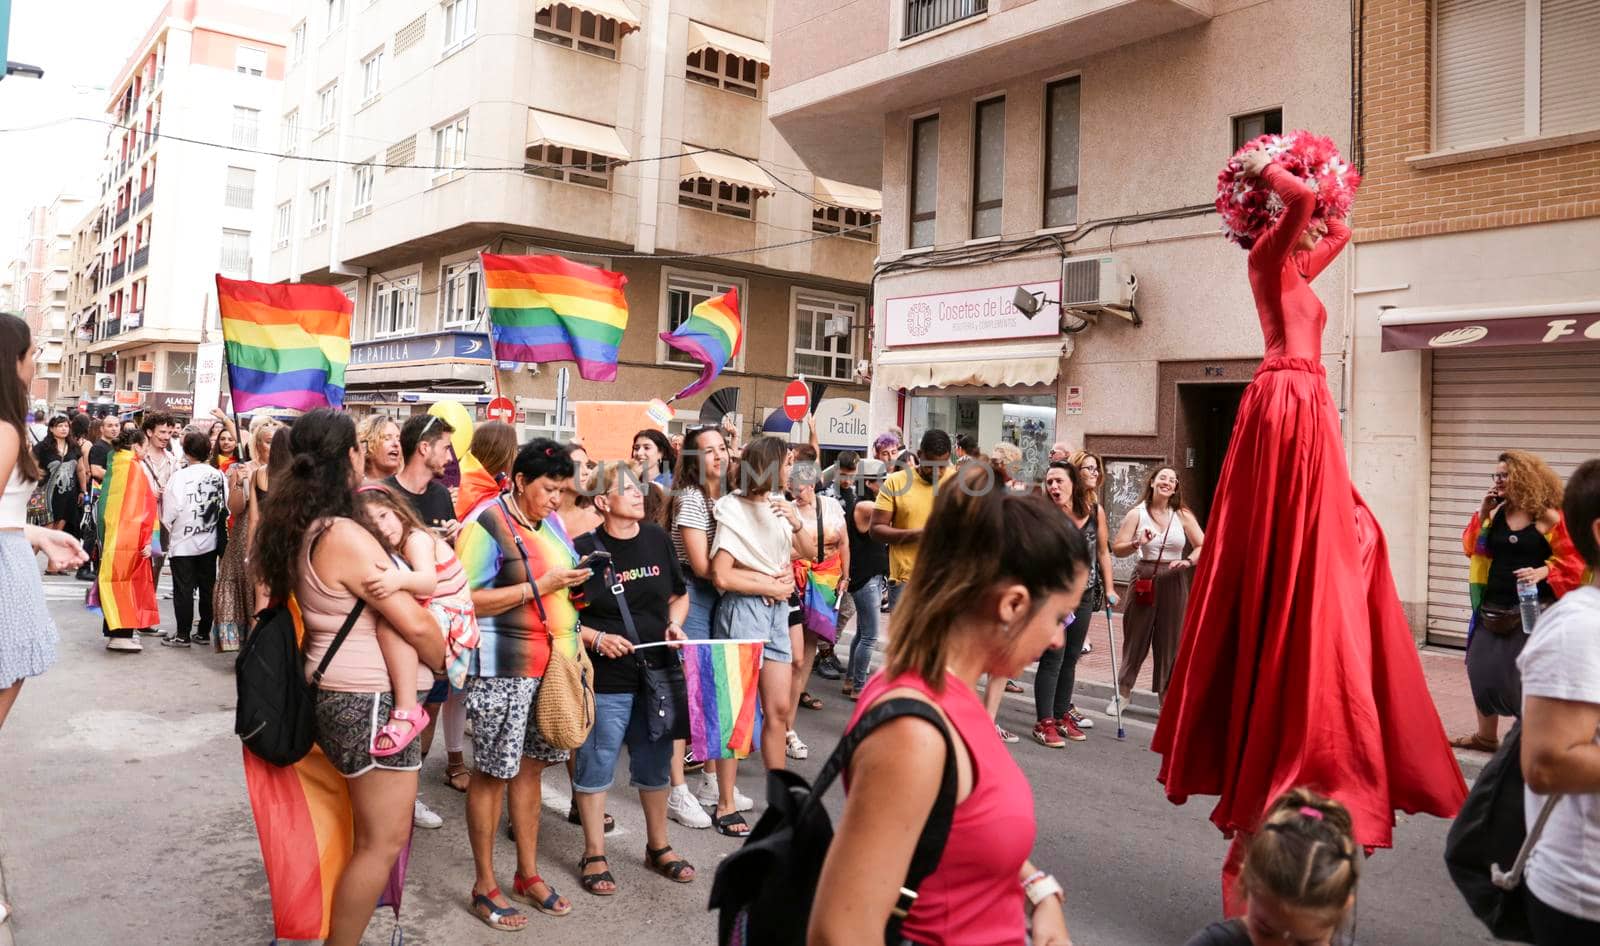 Santa Pola, Alicante, Spain- July 2, 2022: Spanish People attending Gay Pride Parade with rainbow flags, banners and colorful costumes